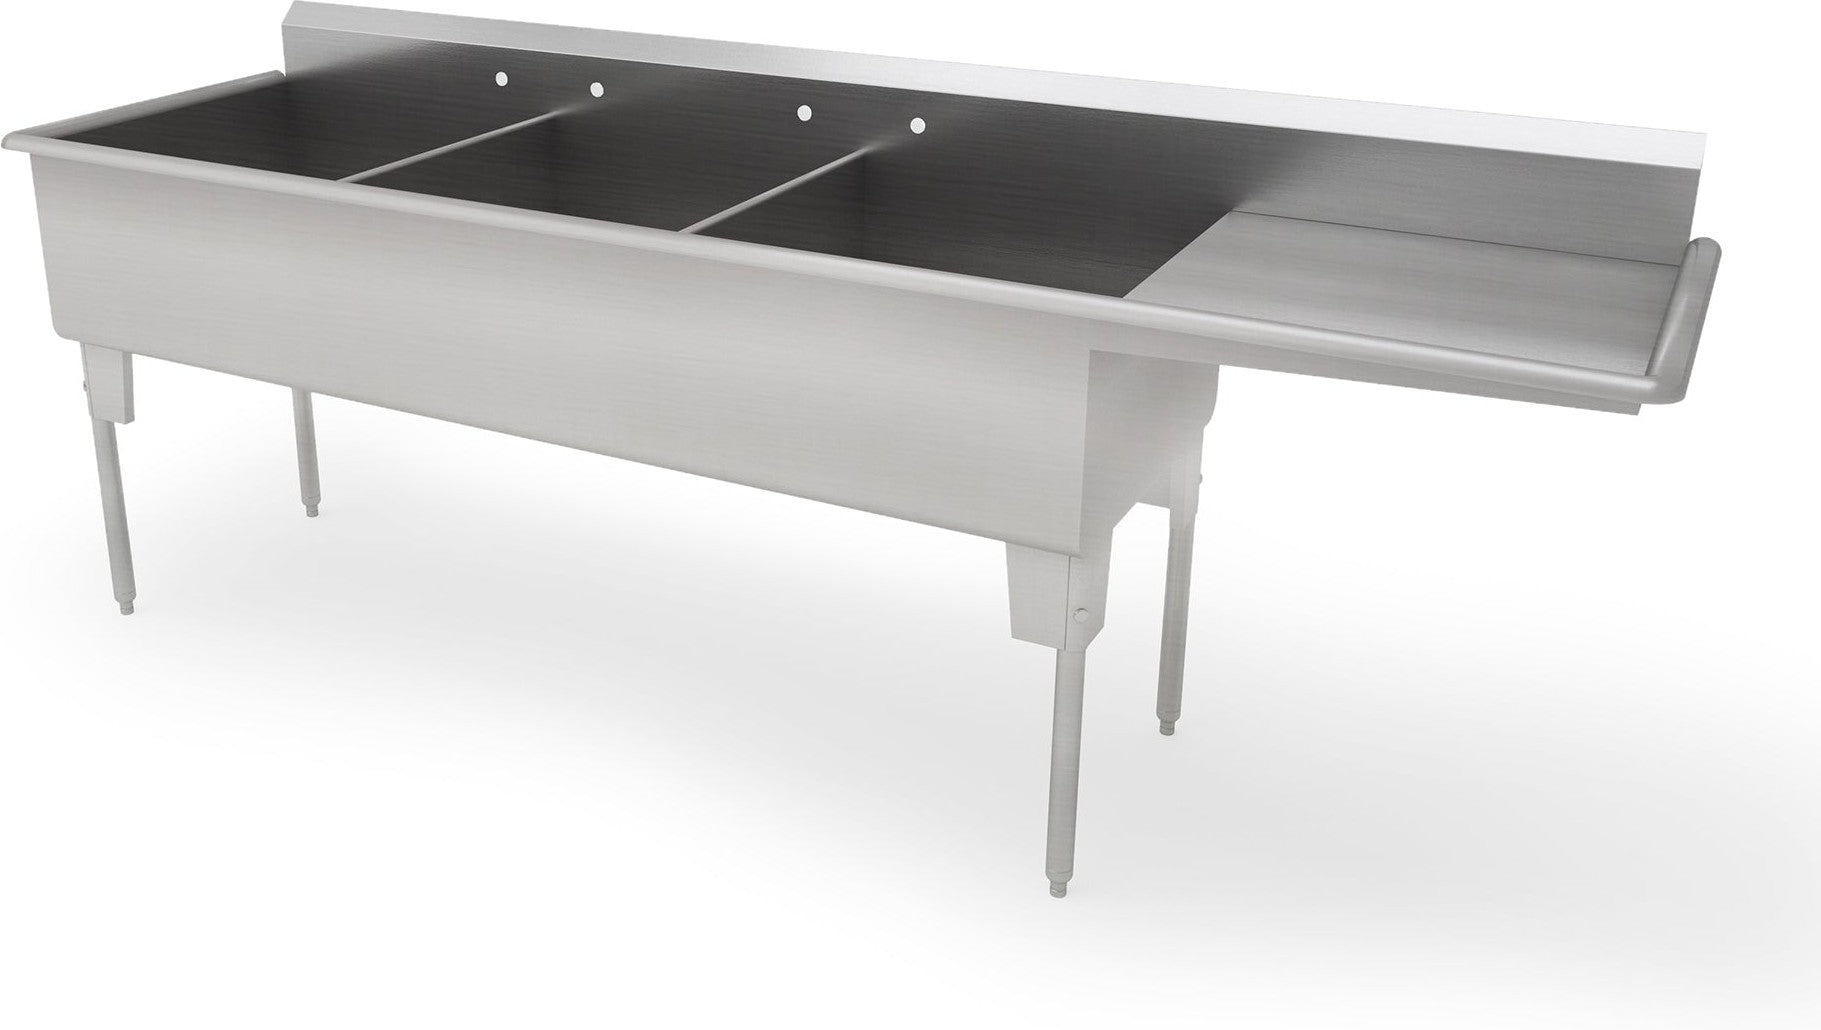 Franesse - 24" x 24" x 14" Triple Compartment Sink With Drainboard - T2472-14-DBR24-O